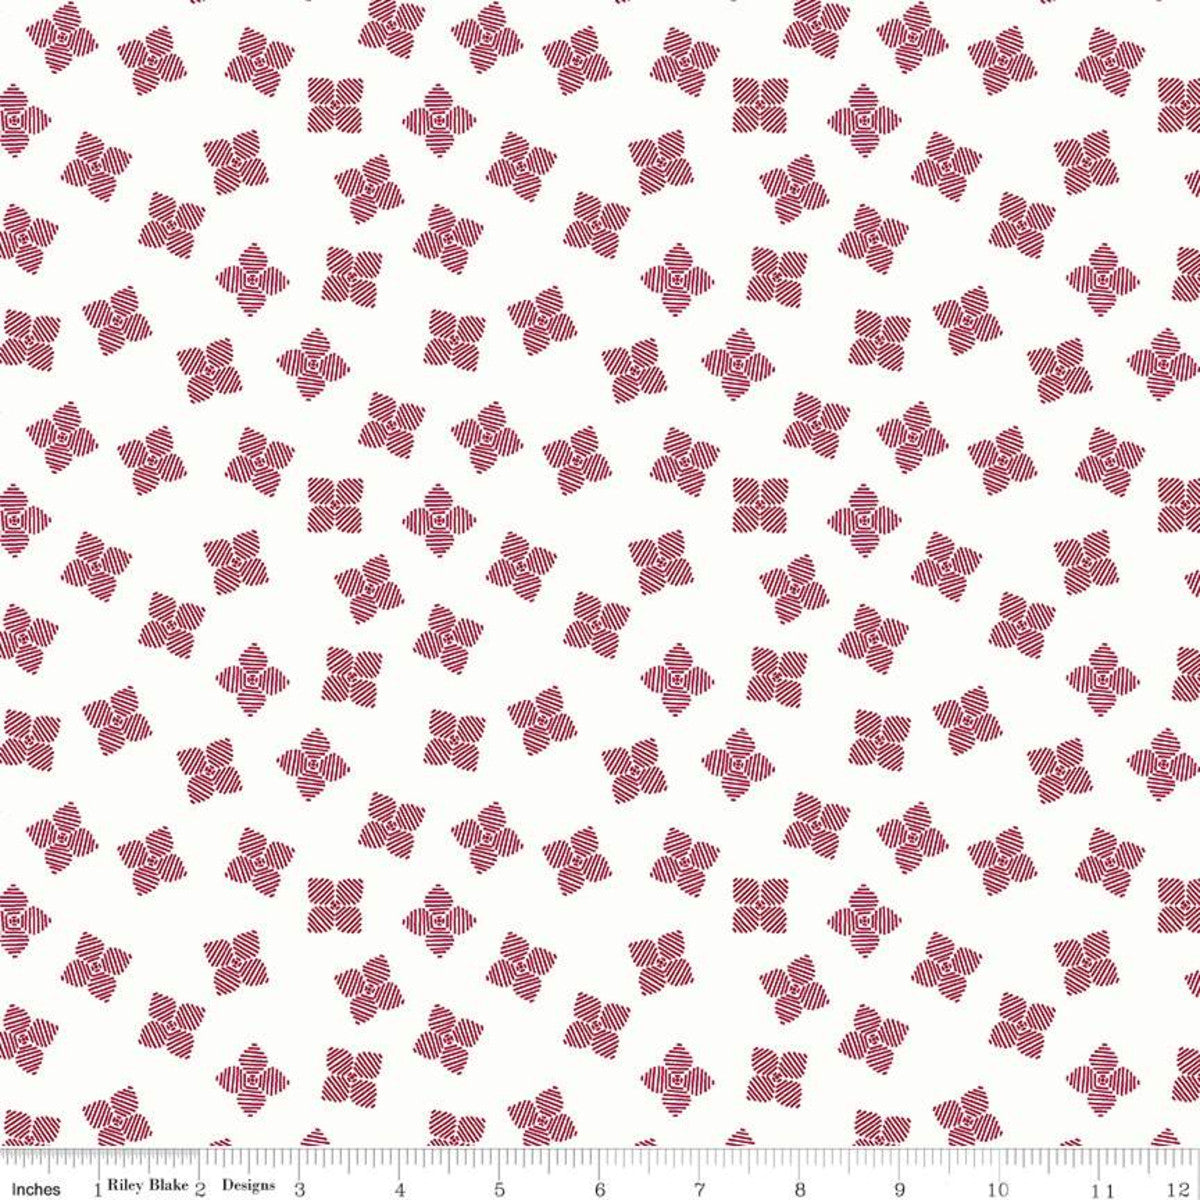 Red Hot - Petals Off White - Yardage